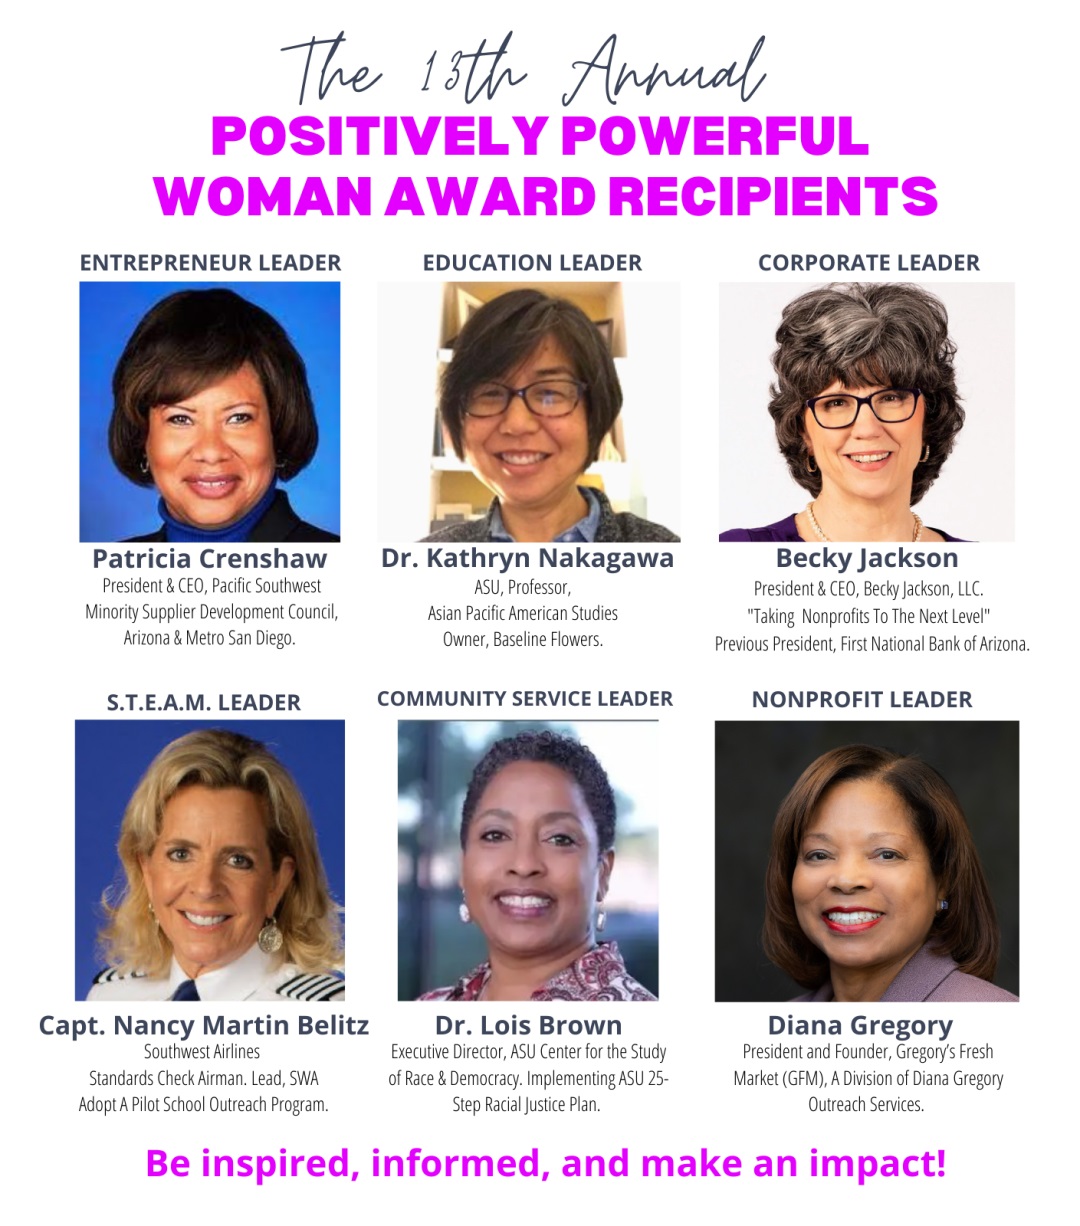 Positively Powerful Woman Awards at ASU 365 Community Union in Tempe on October 28